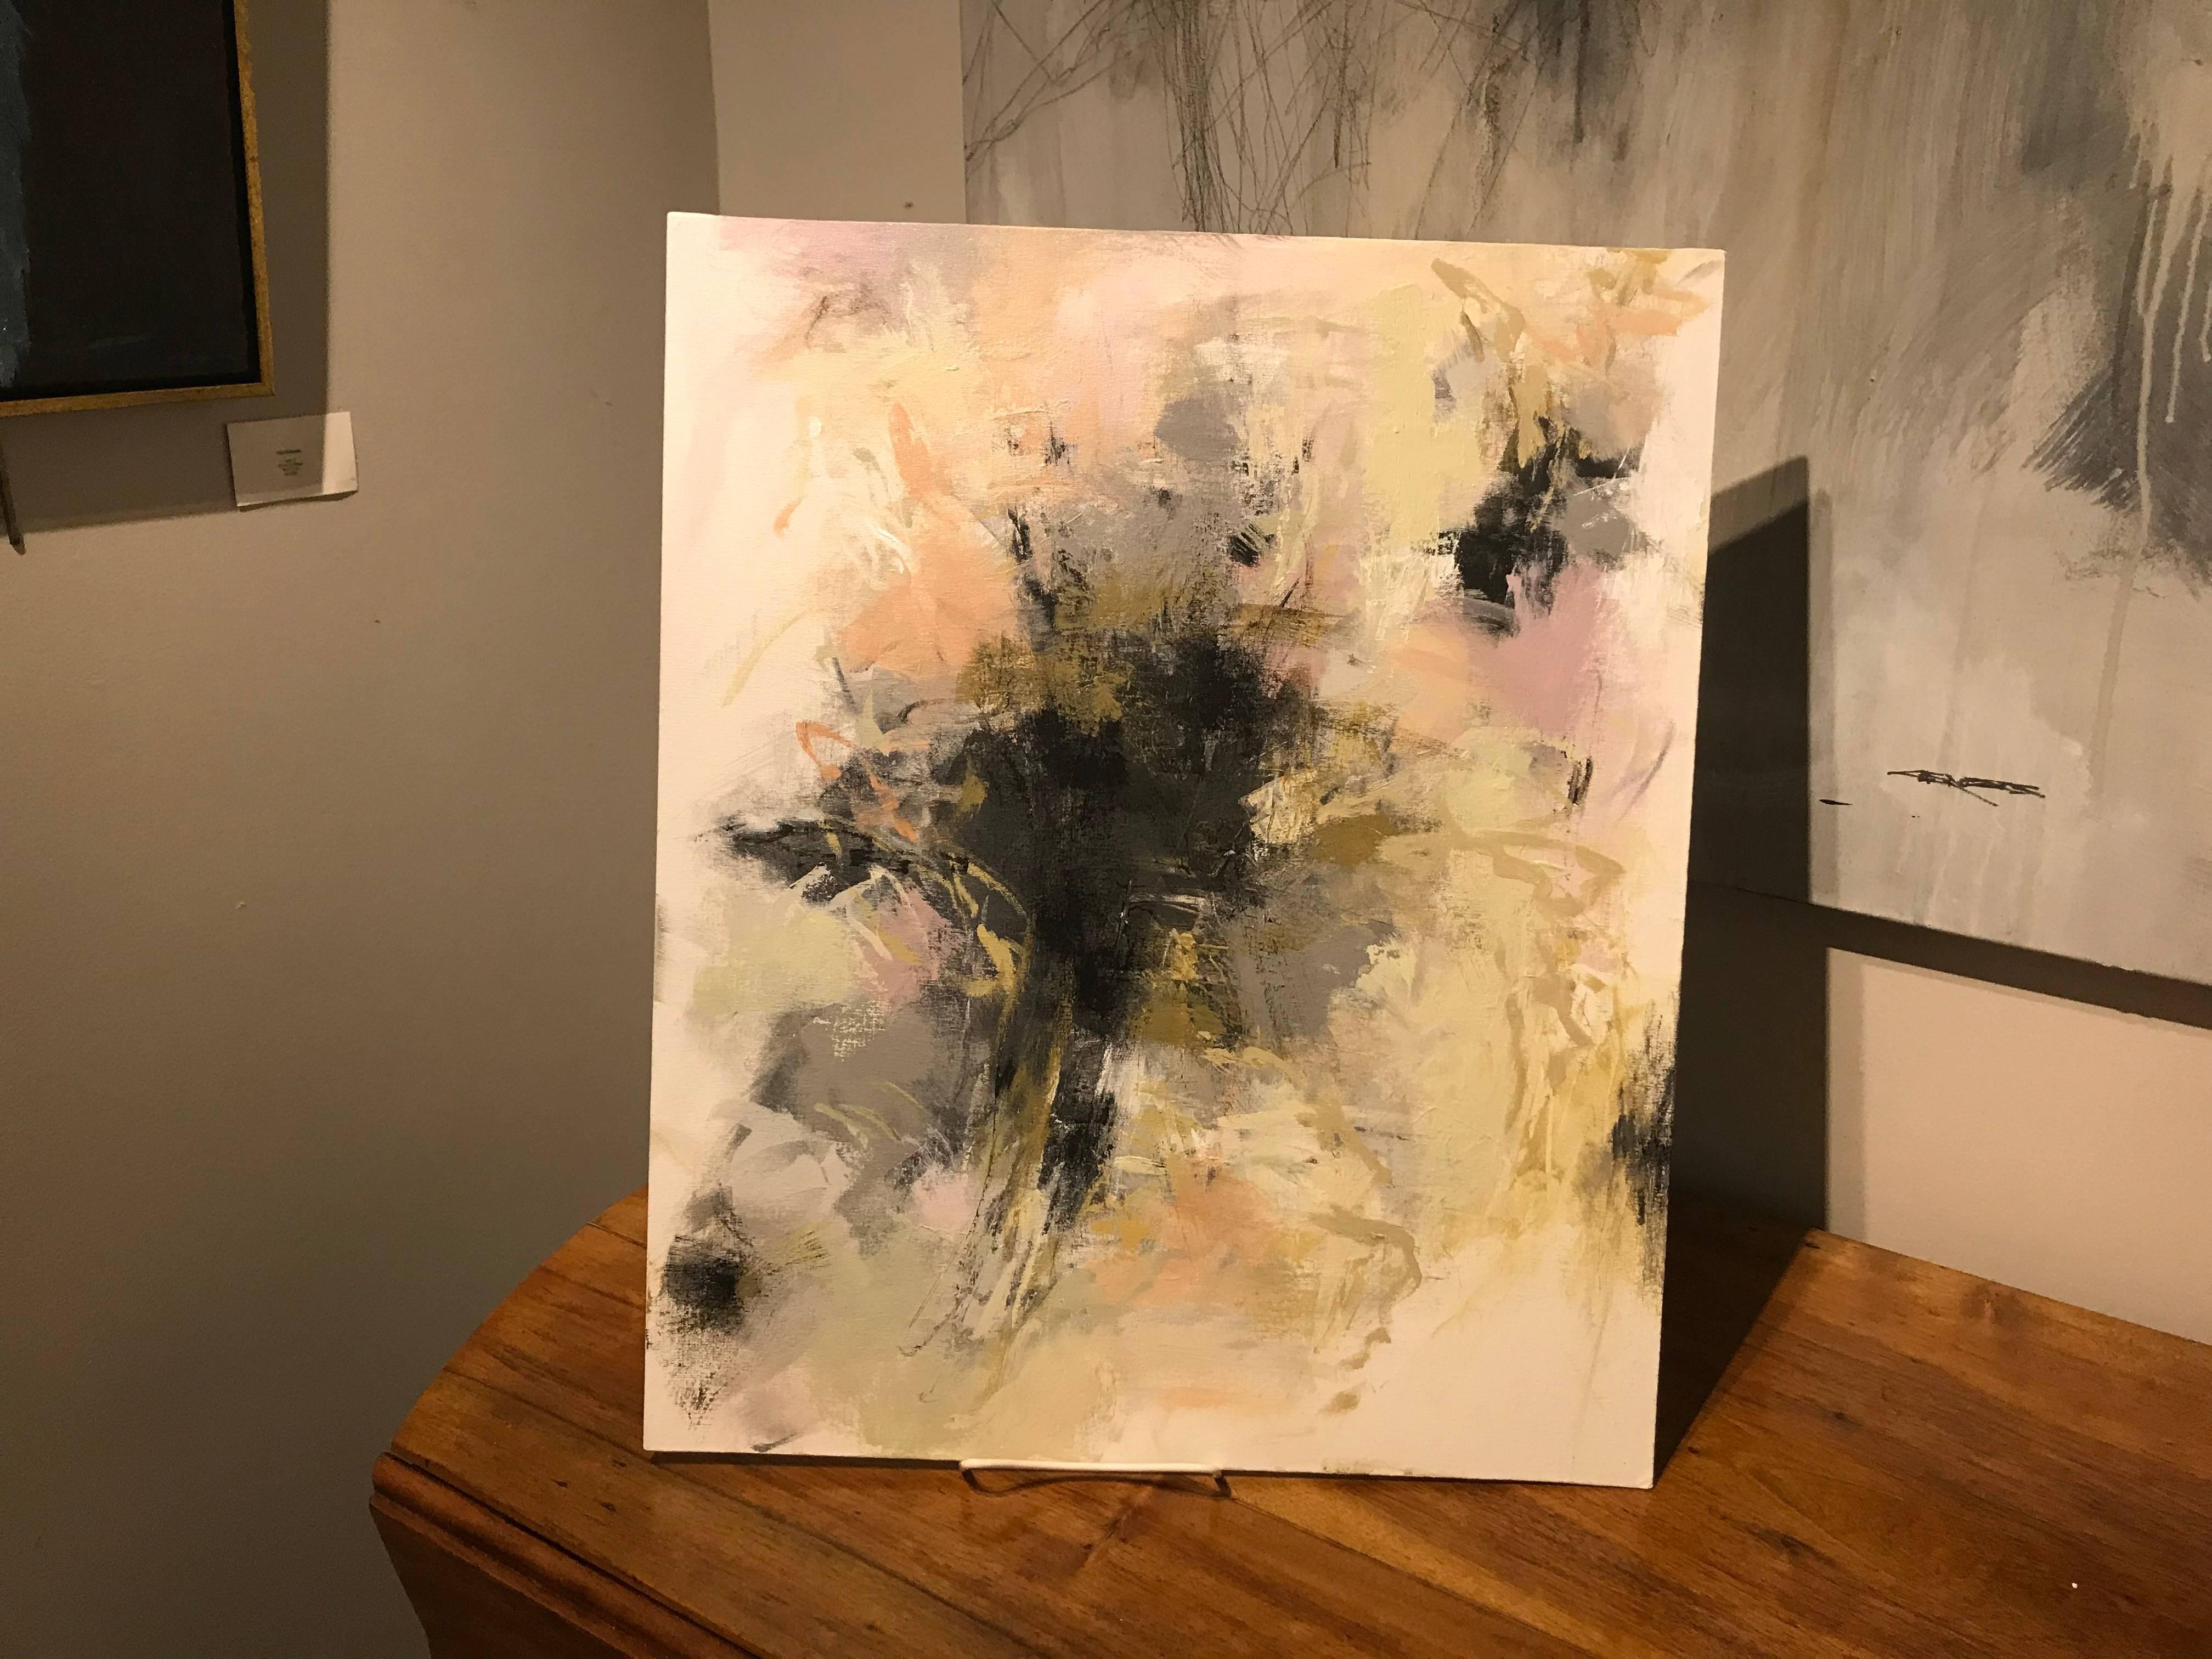 'Delicate Floral 2' is an abstract expressionist acrylic on canvas board painting created by American artist Debora Stewart in 2017. The energetic brushstrokes are made of an exquisite palette dominated by black, gold and beige colors accented by